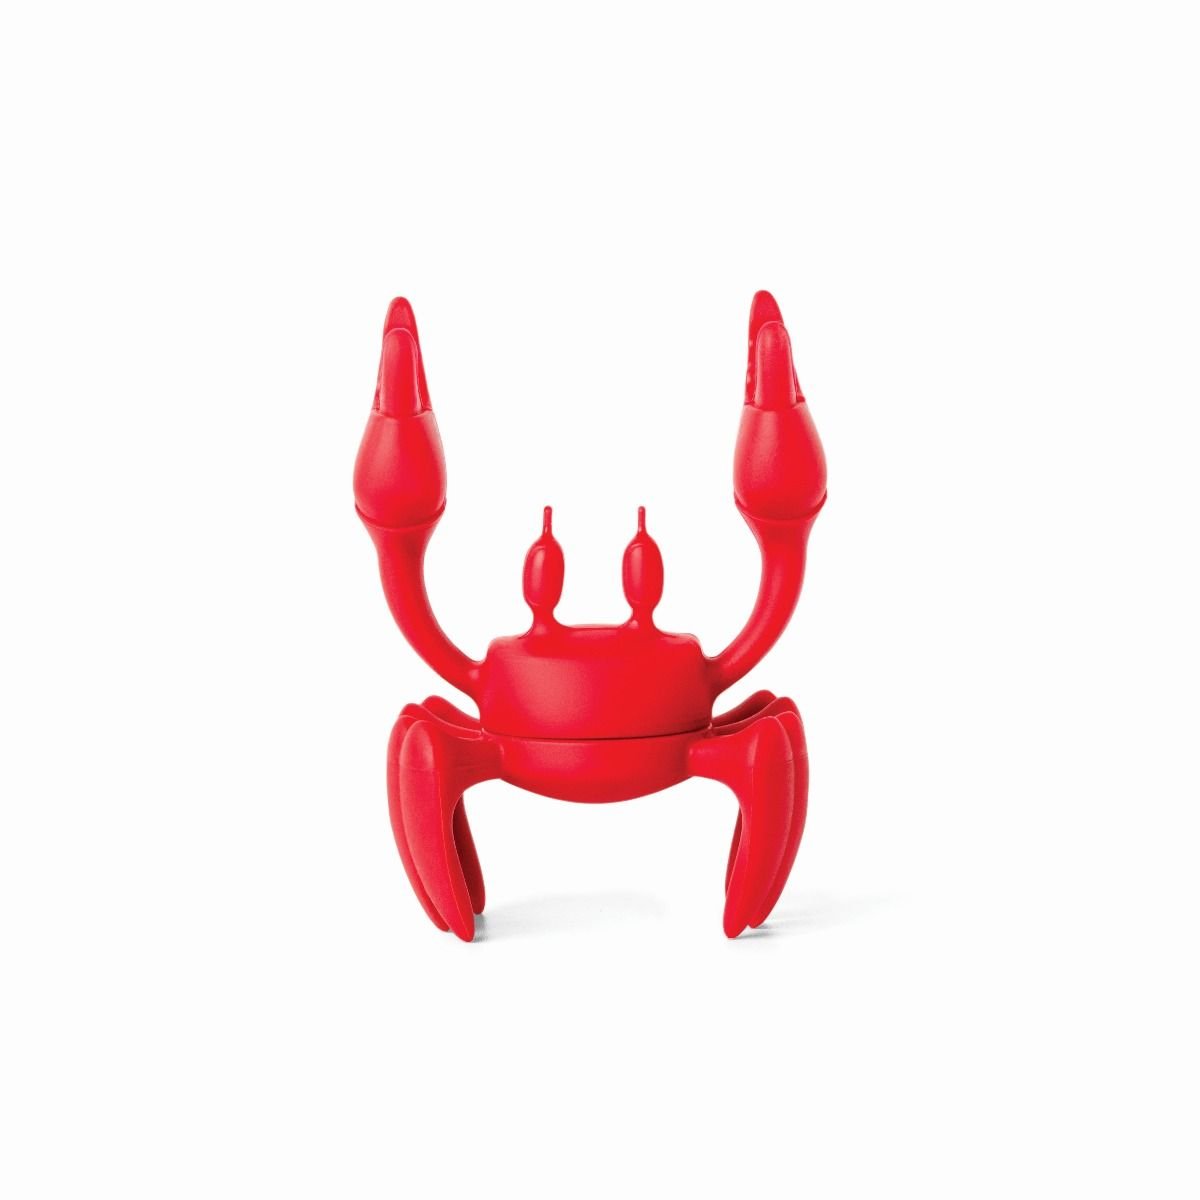 Ototo Red Crab Spoon Holder & Steam Releaser - Chef's Complements